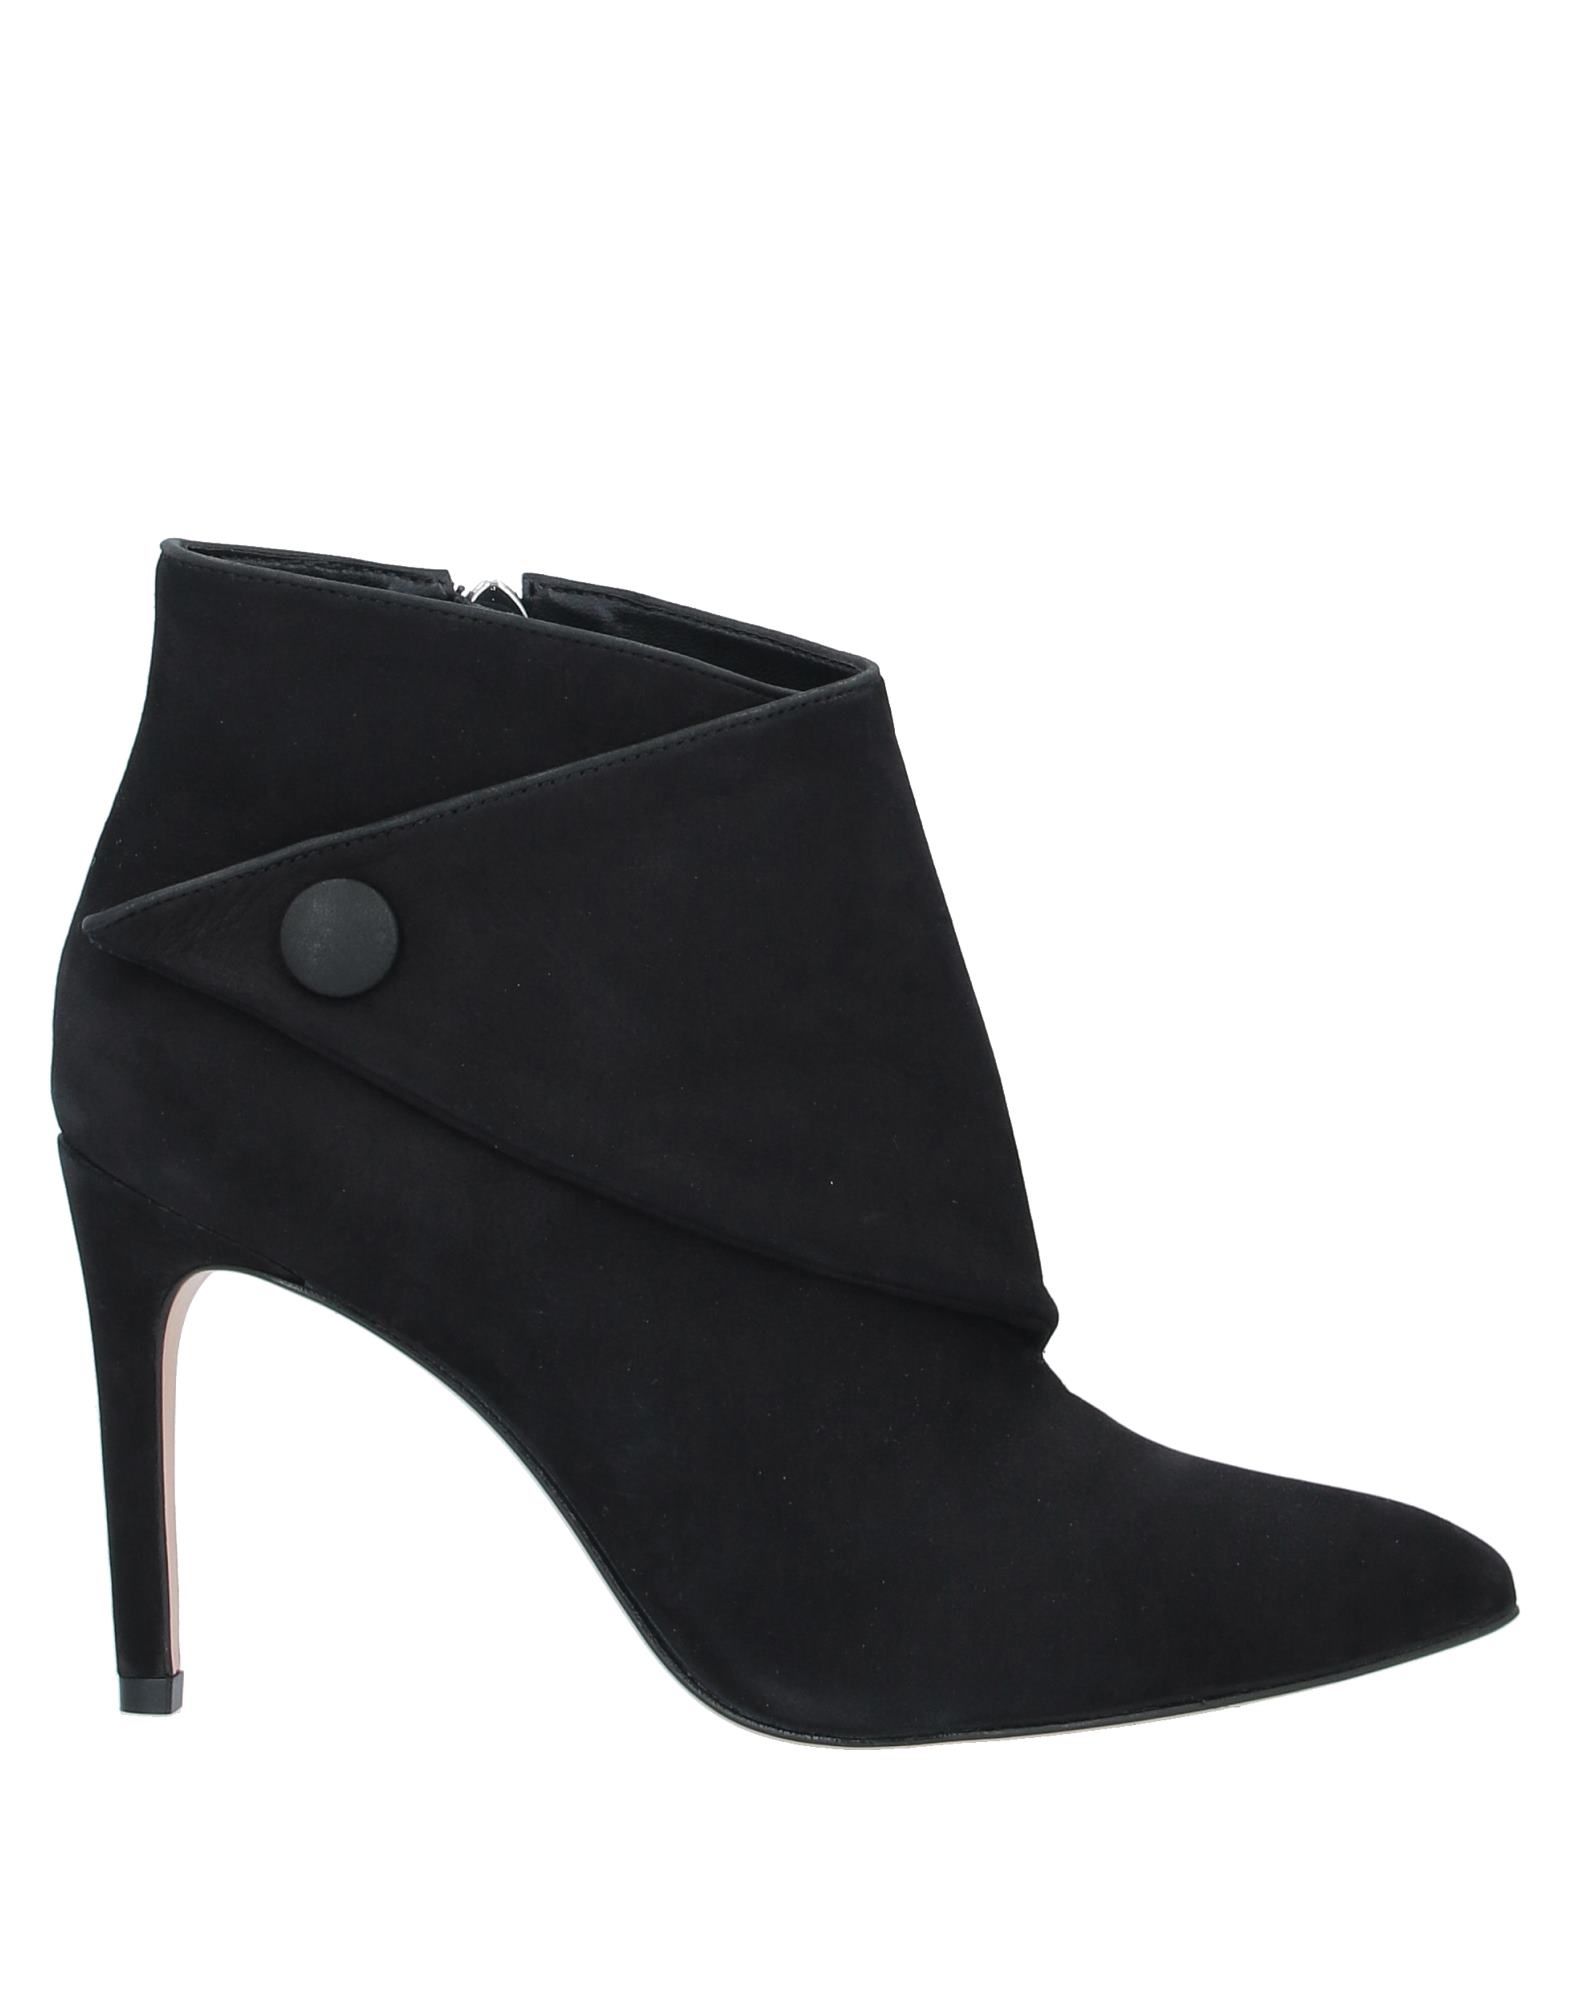 VICENZA) Ankle boots - Item 11907335